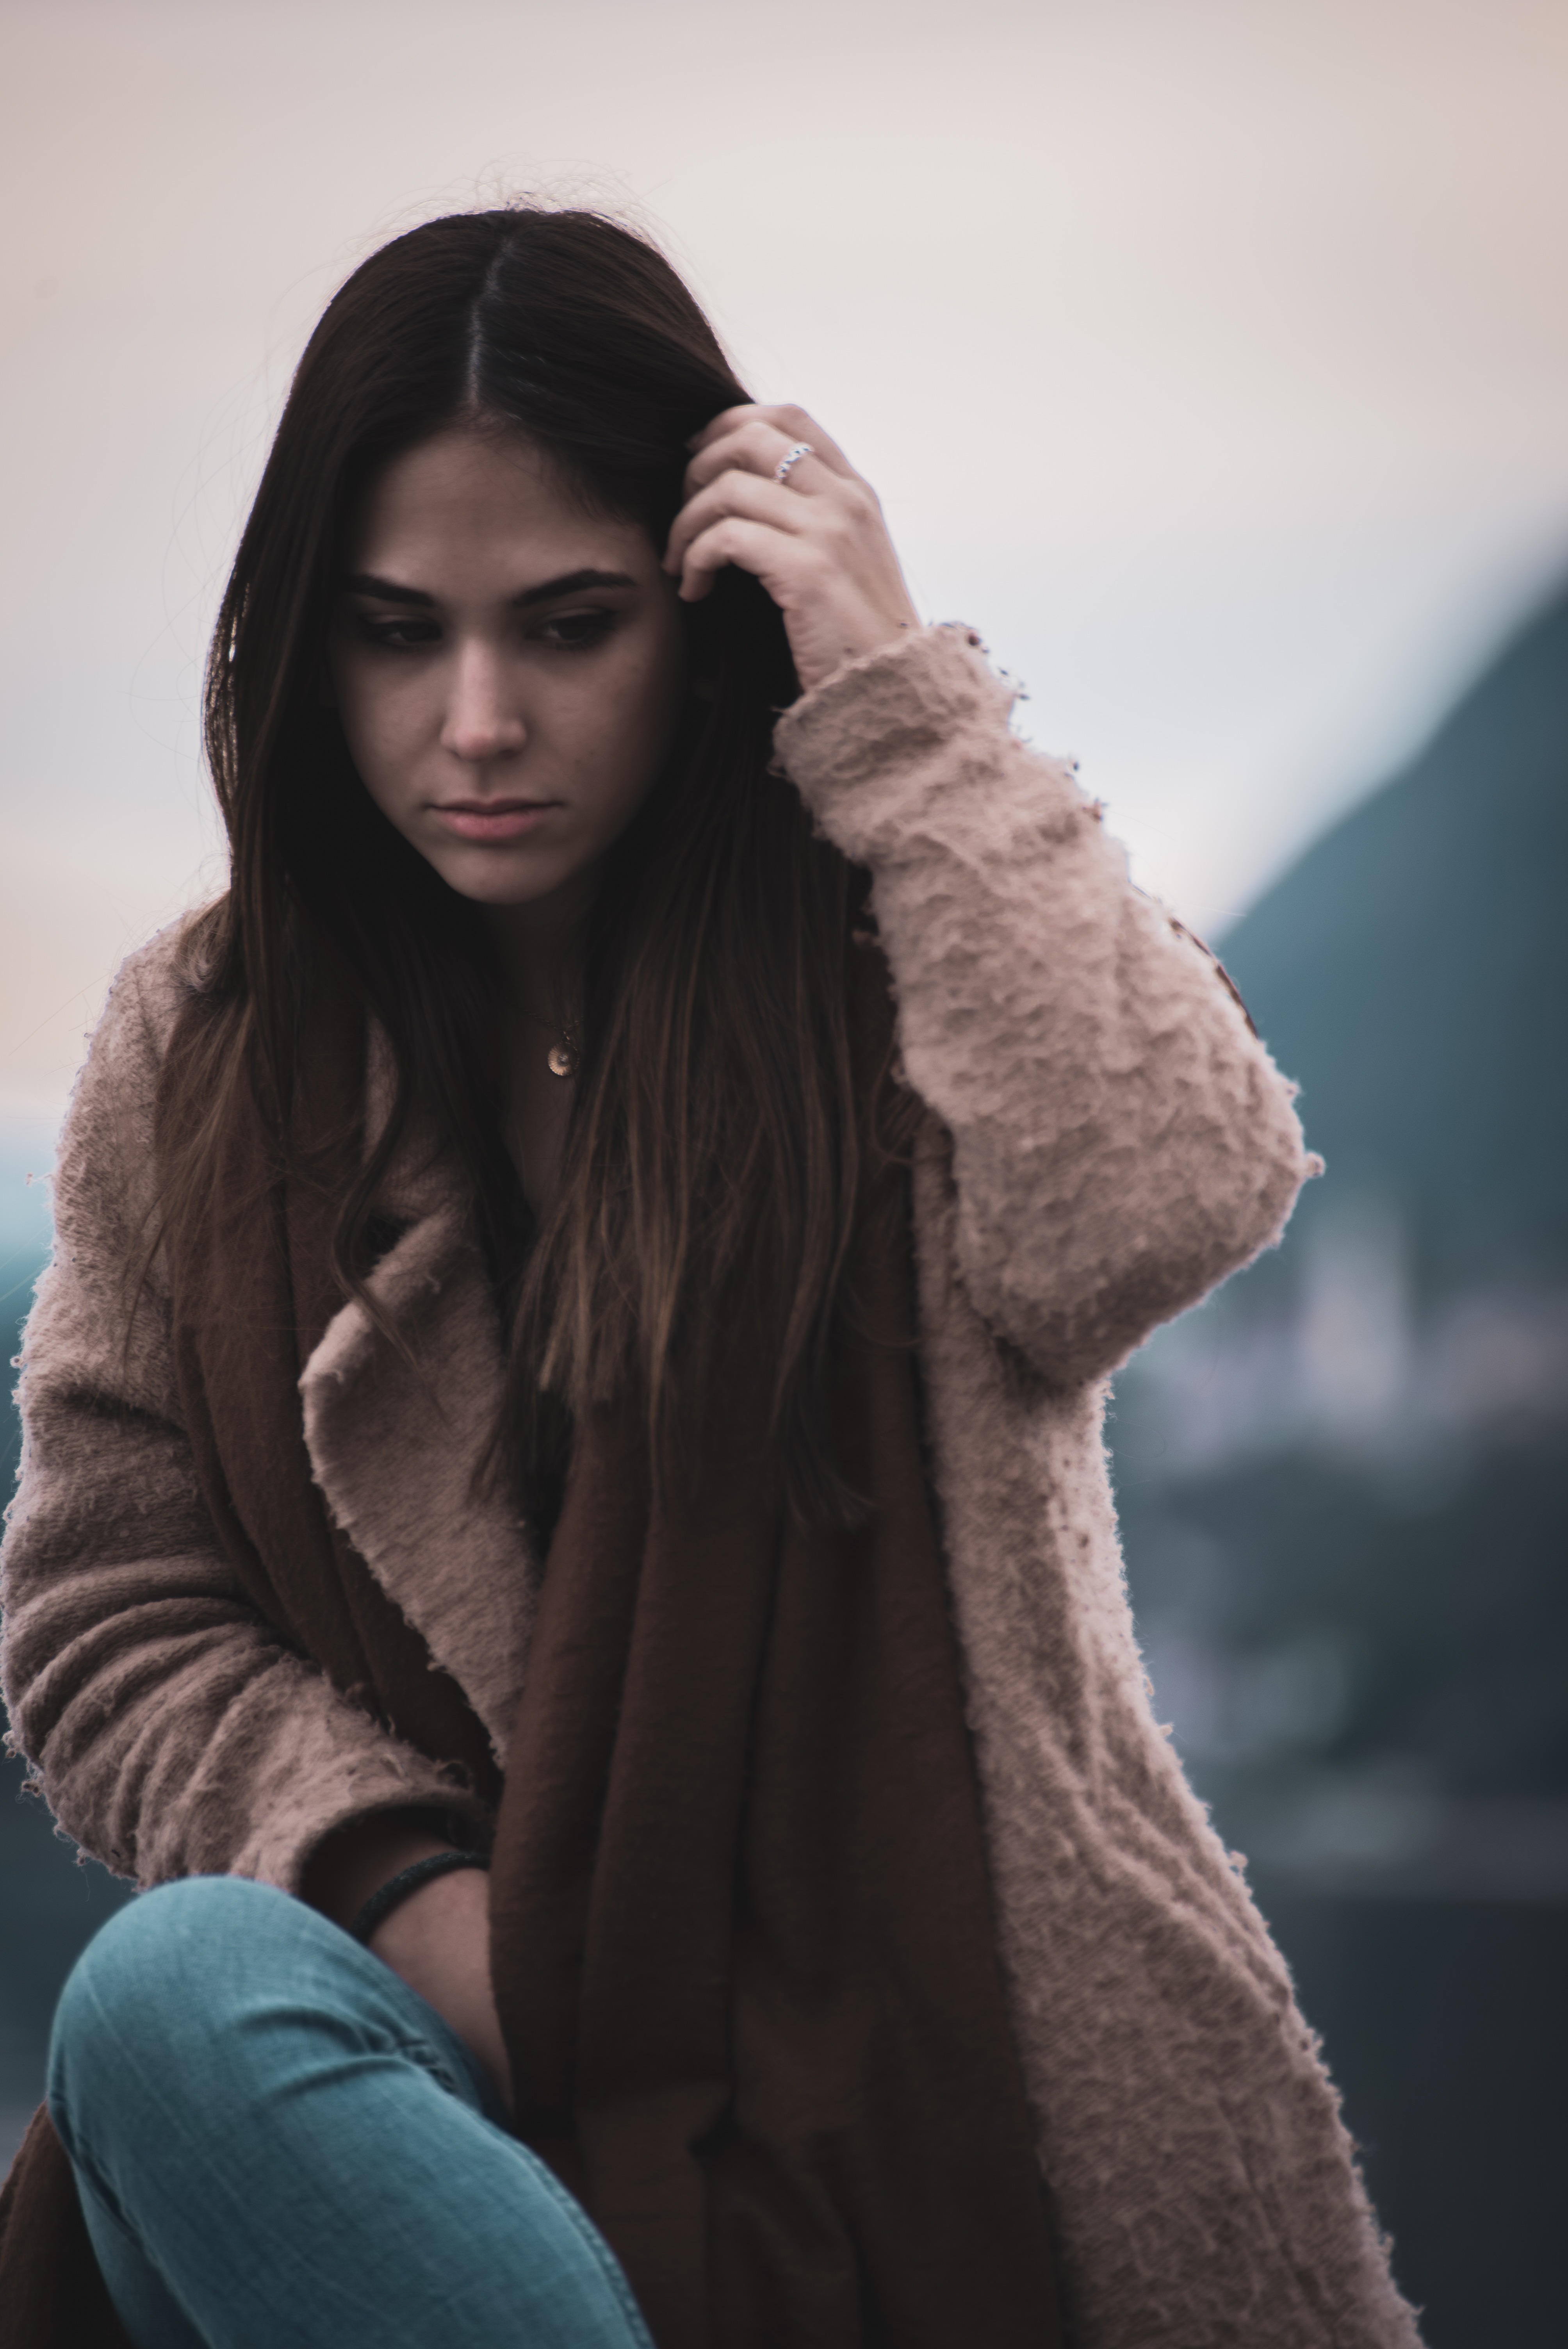 Teen diagnosed with an anxiety disorder in a brown fur coat sitting and holding her hair
